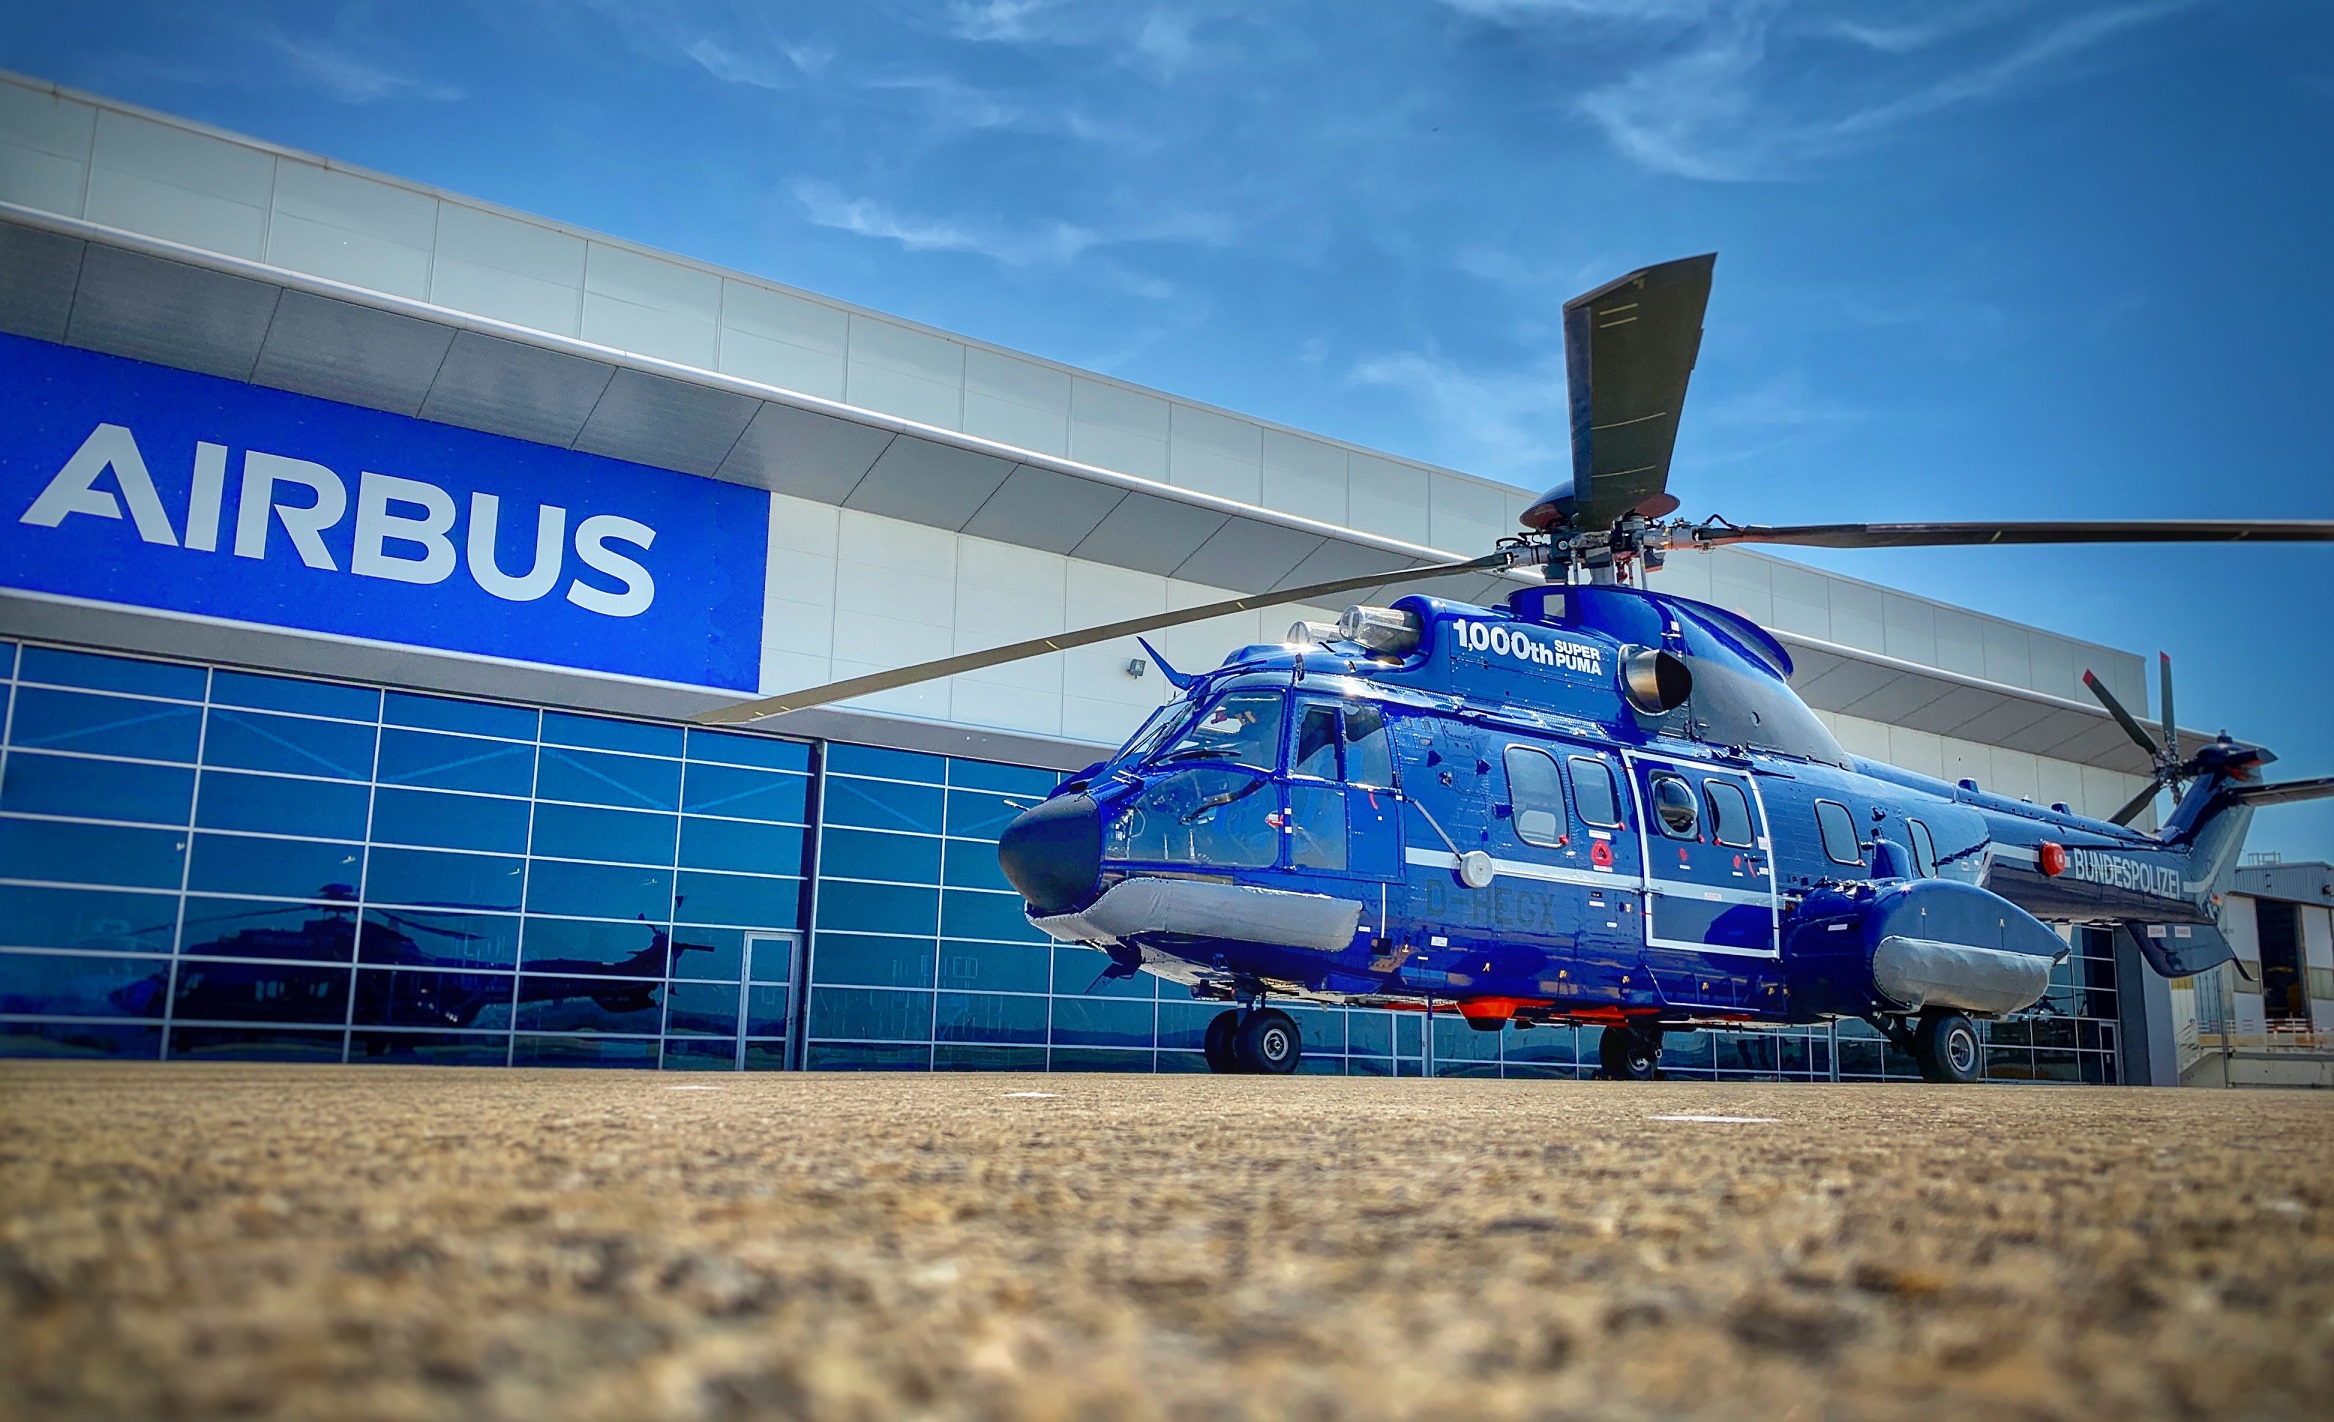 Airbus delivers 1,000th Super Puma helicopter AviTrader